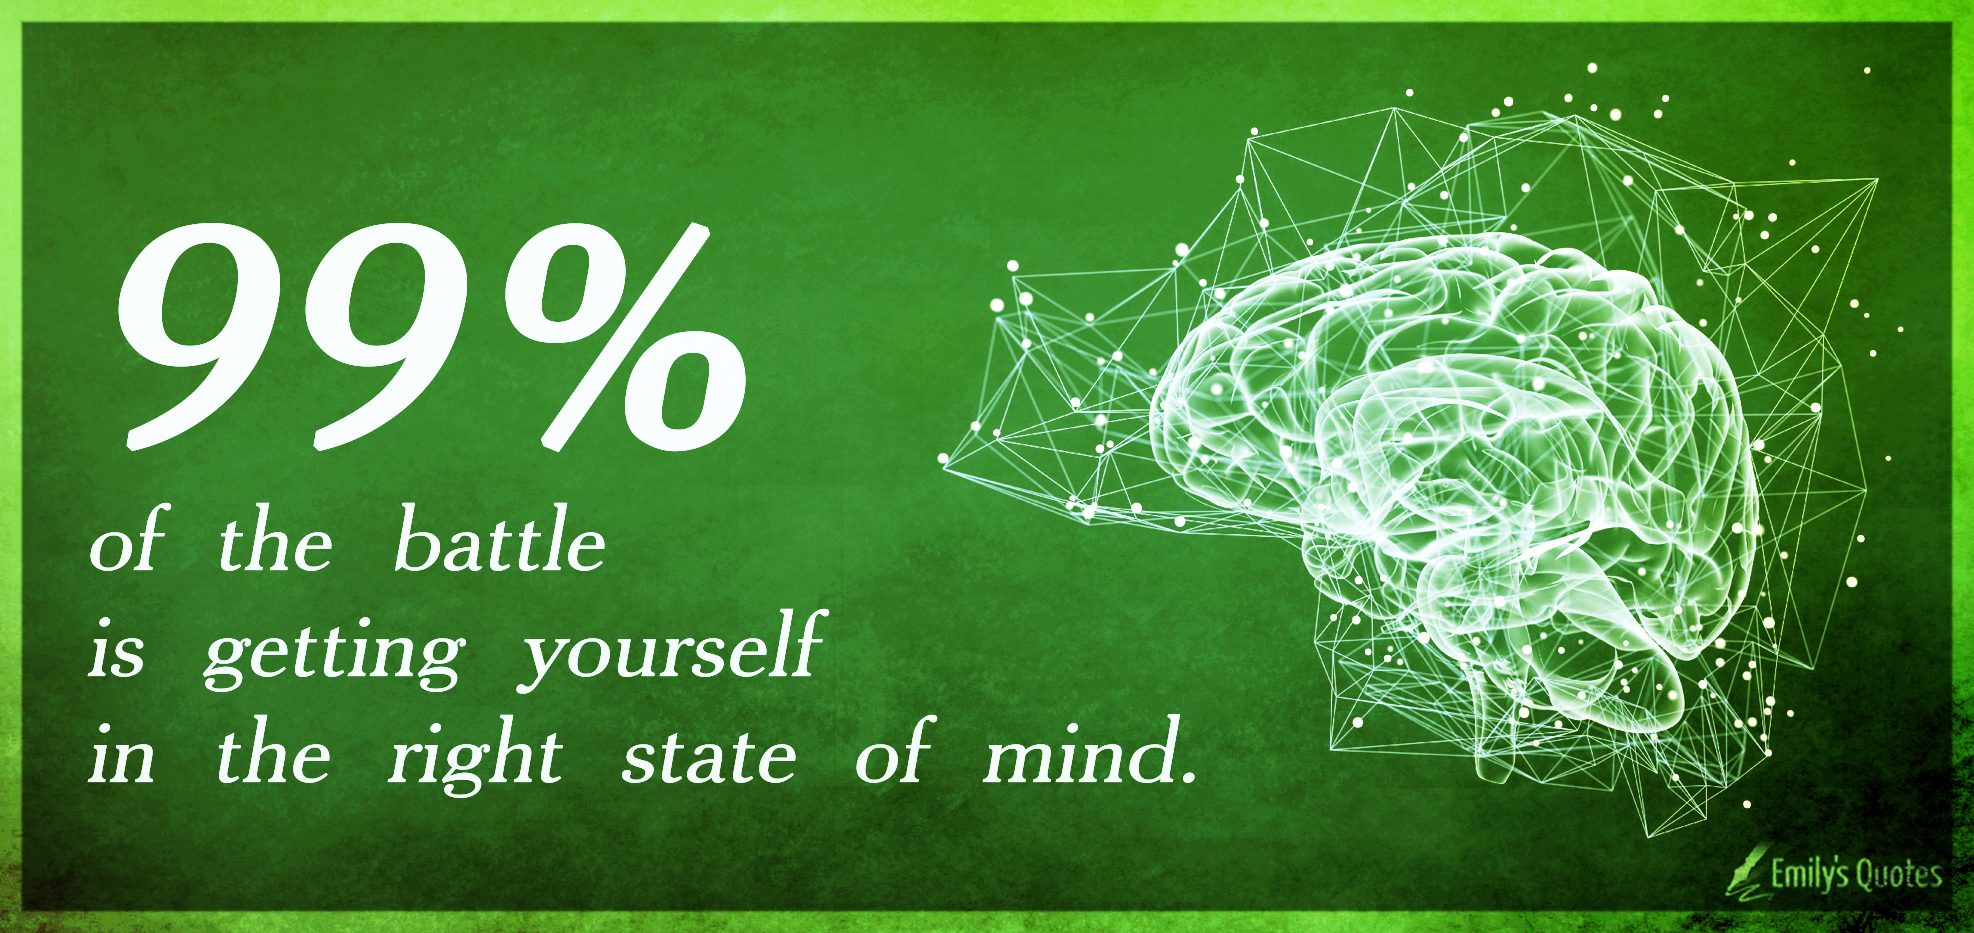 99% of the battle is getting yourself in the right state of mind